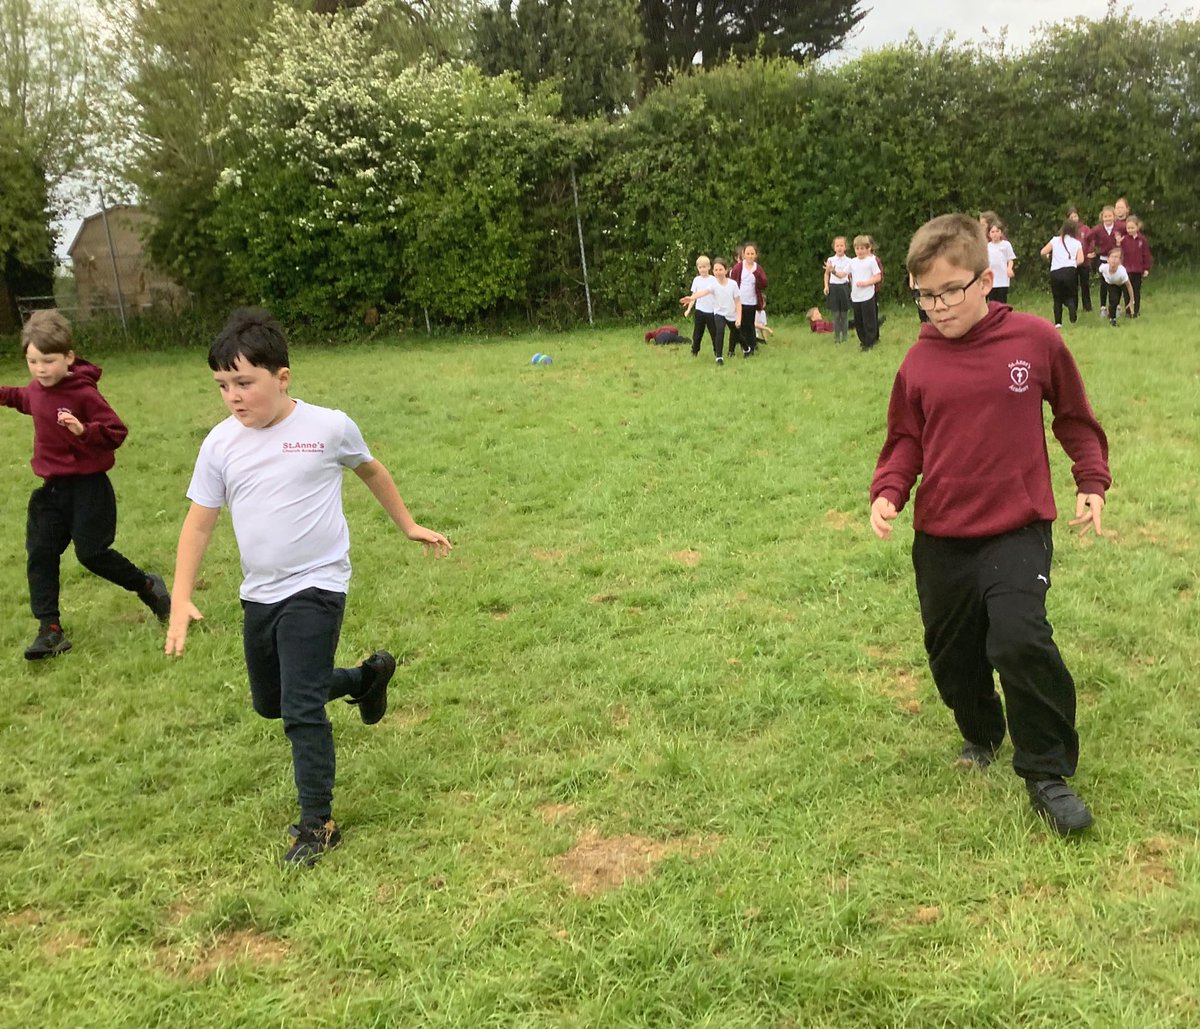 In PE we have begun practising for sports day by developing our sprinting skills. We focused on keeping our heads up and using our arms to propel us forwards. @StAnnes_EHS @GWilliamsSACA